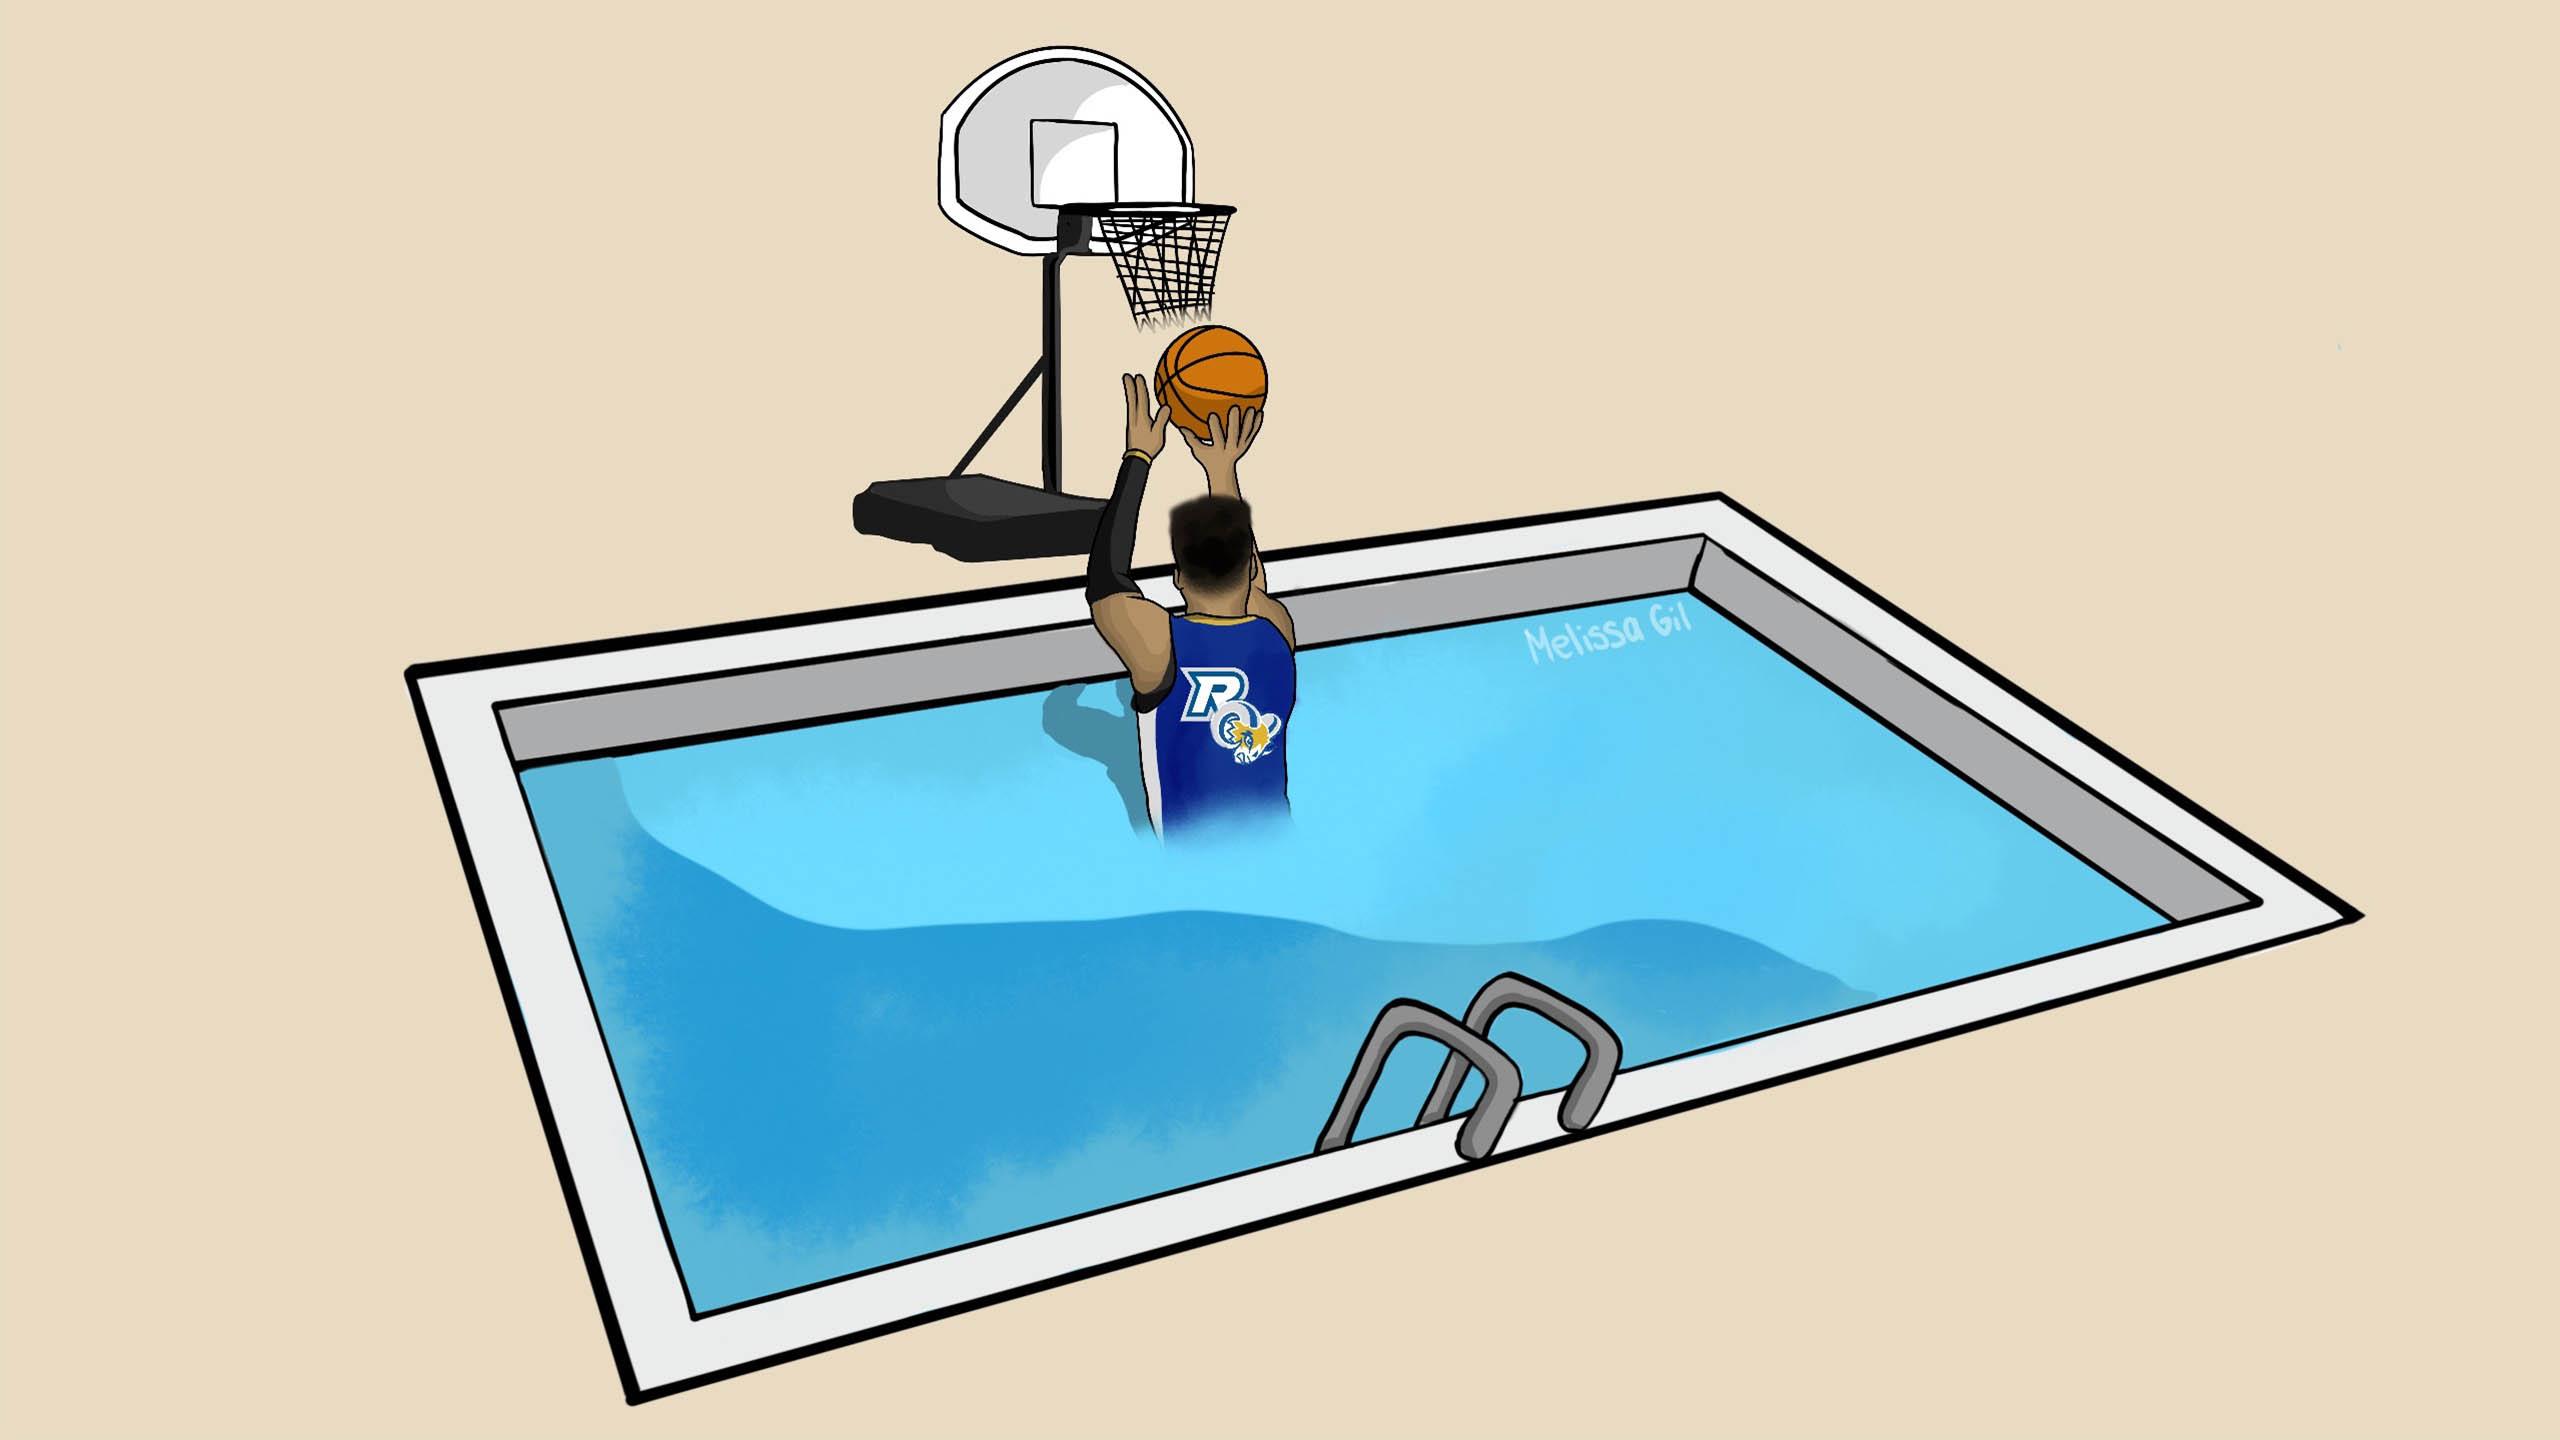 Person in a pool, shooting basketball into hoop